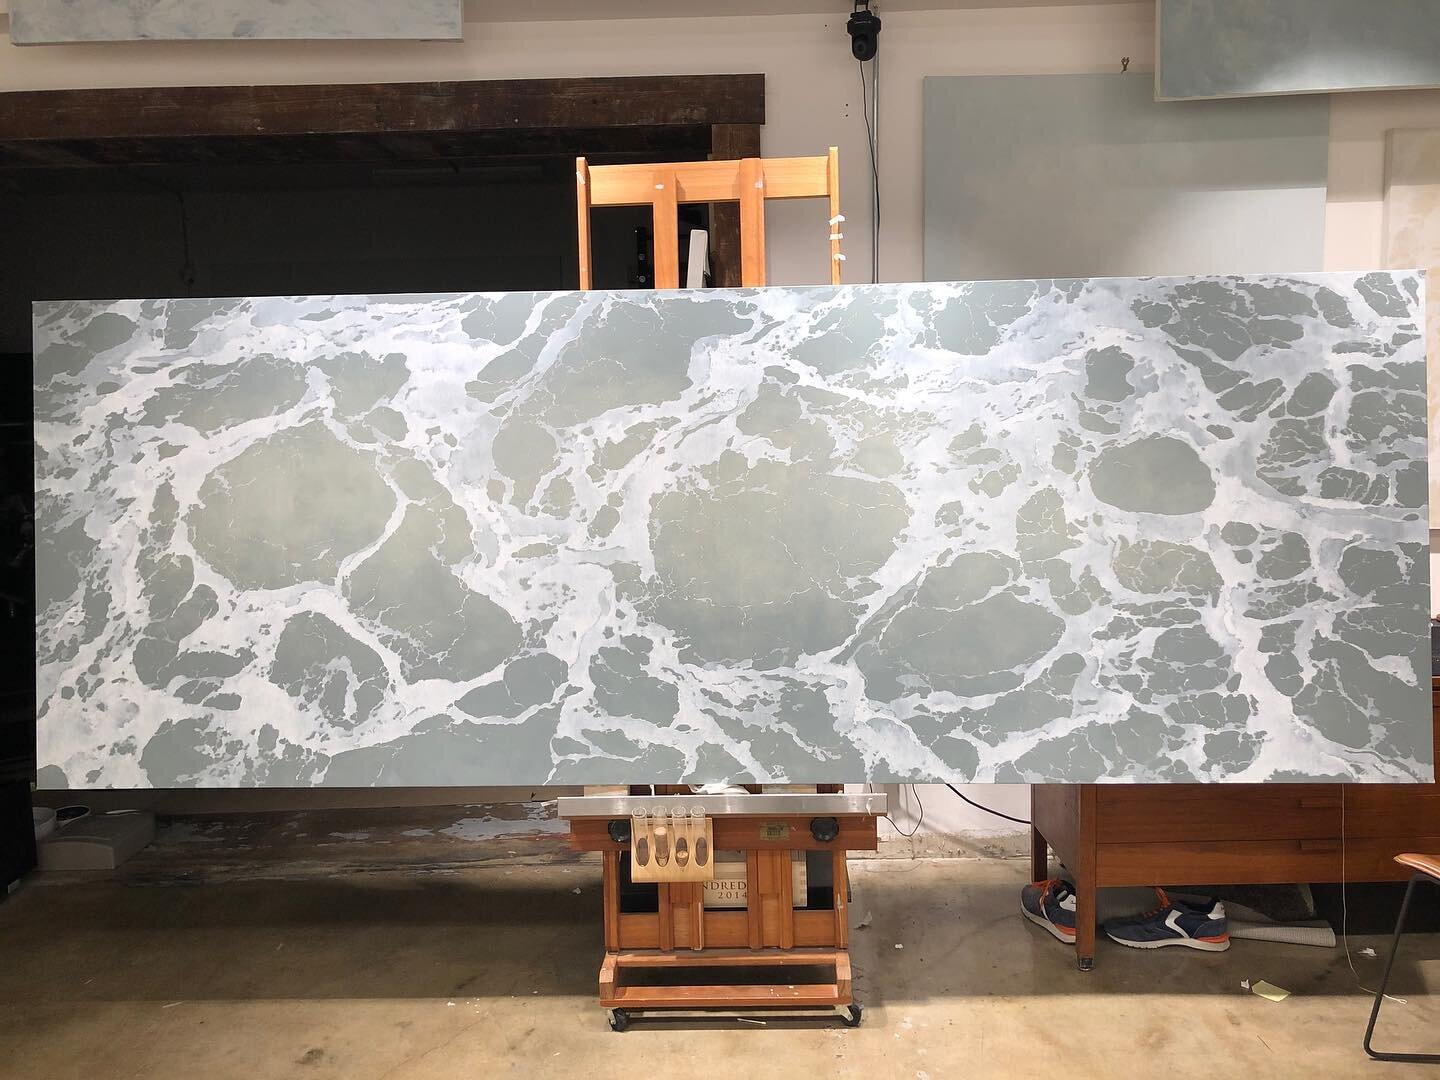 &ldquo;I think I&rsquo;m gonna need a bigger easel&rdquo;&hellip;.
At 48&rdquo; x 134&rdquo;, this commissioned seascape is one of longest canvases I&rsquo;ve ever worked on.  Just putting on the finishing touches and then it will be time to build a 